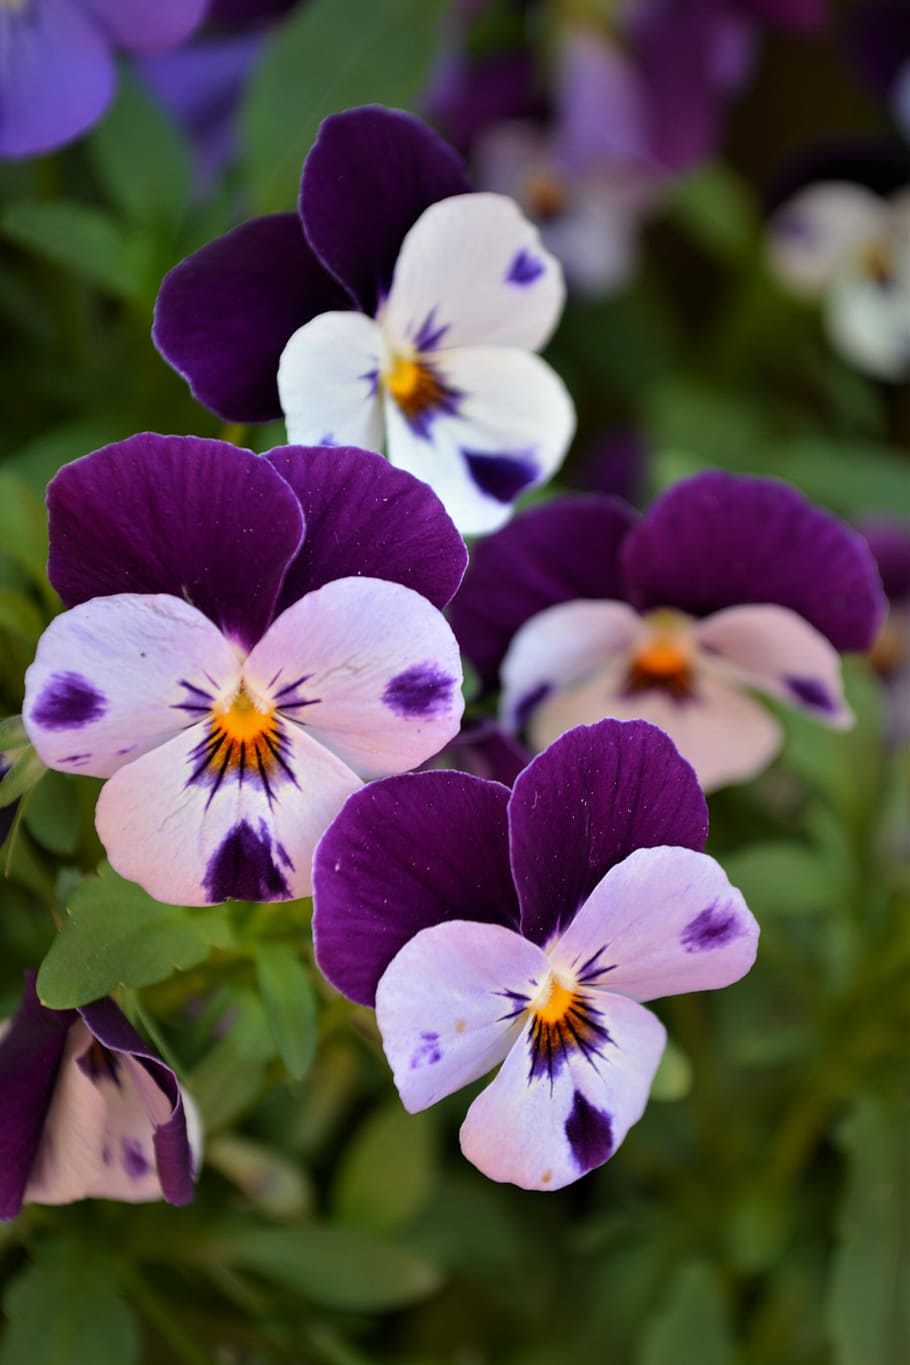 white, purple, pansies, pansy, flowers, spring, close, violet, blossom, bloom